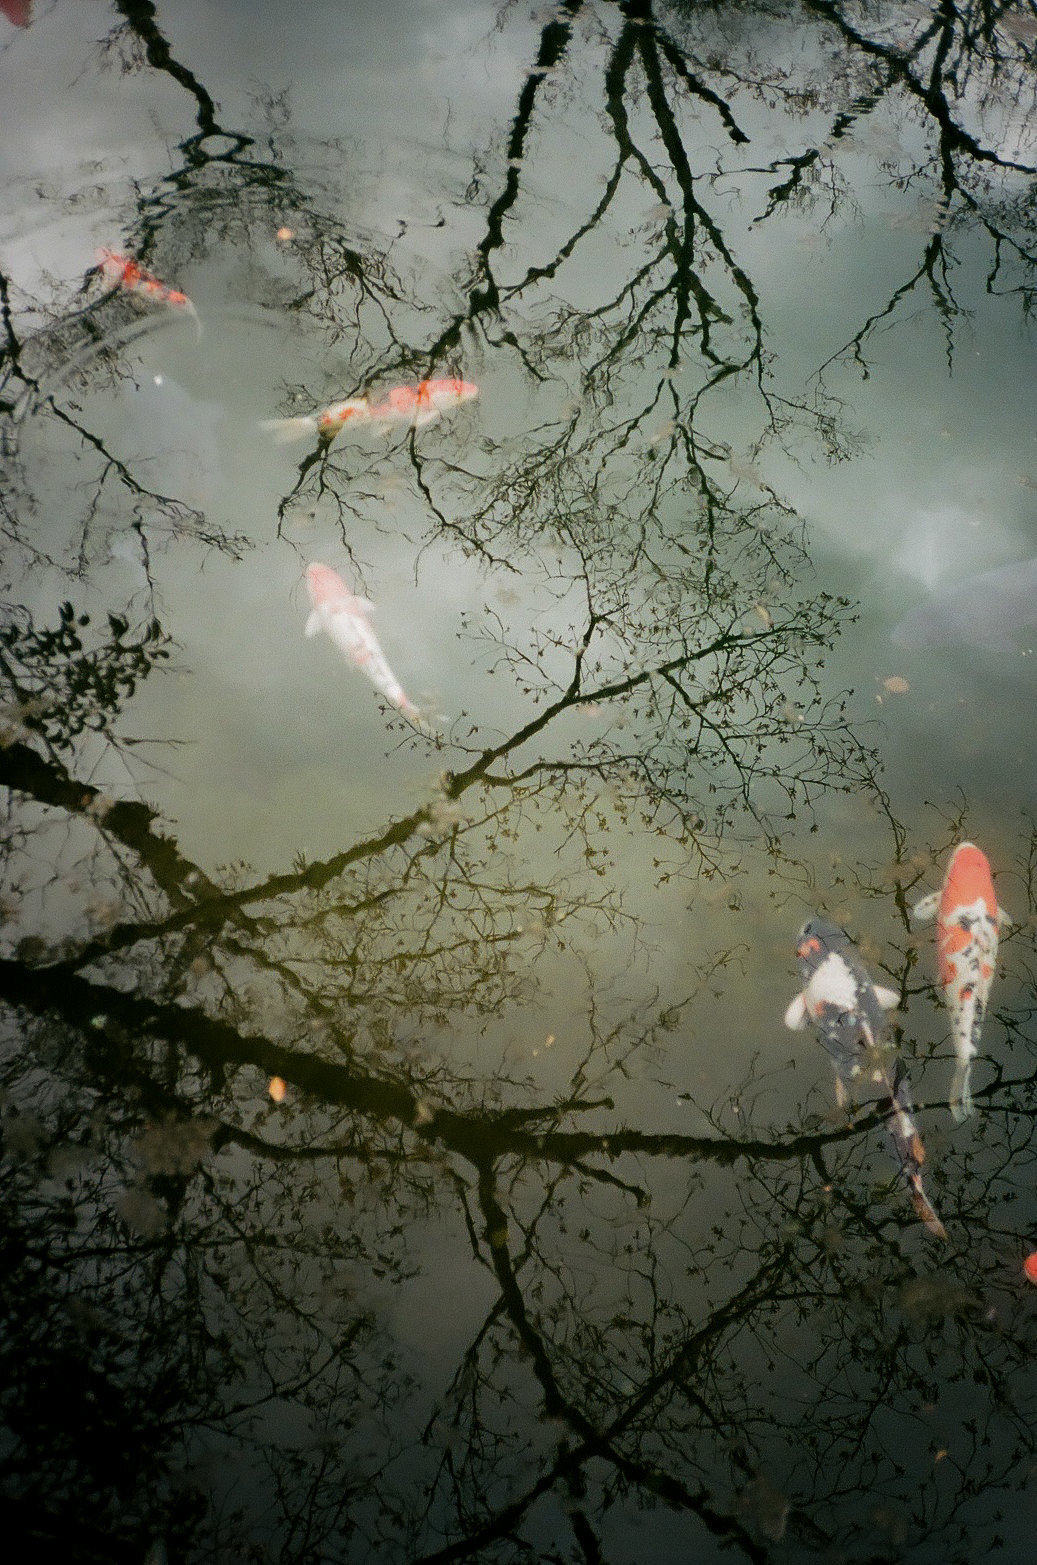 Giant koi swimming in a pond with tress reflected on the water